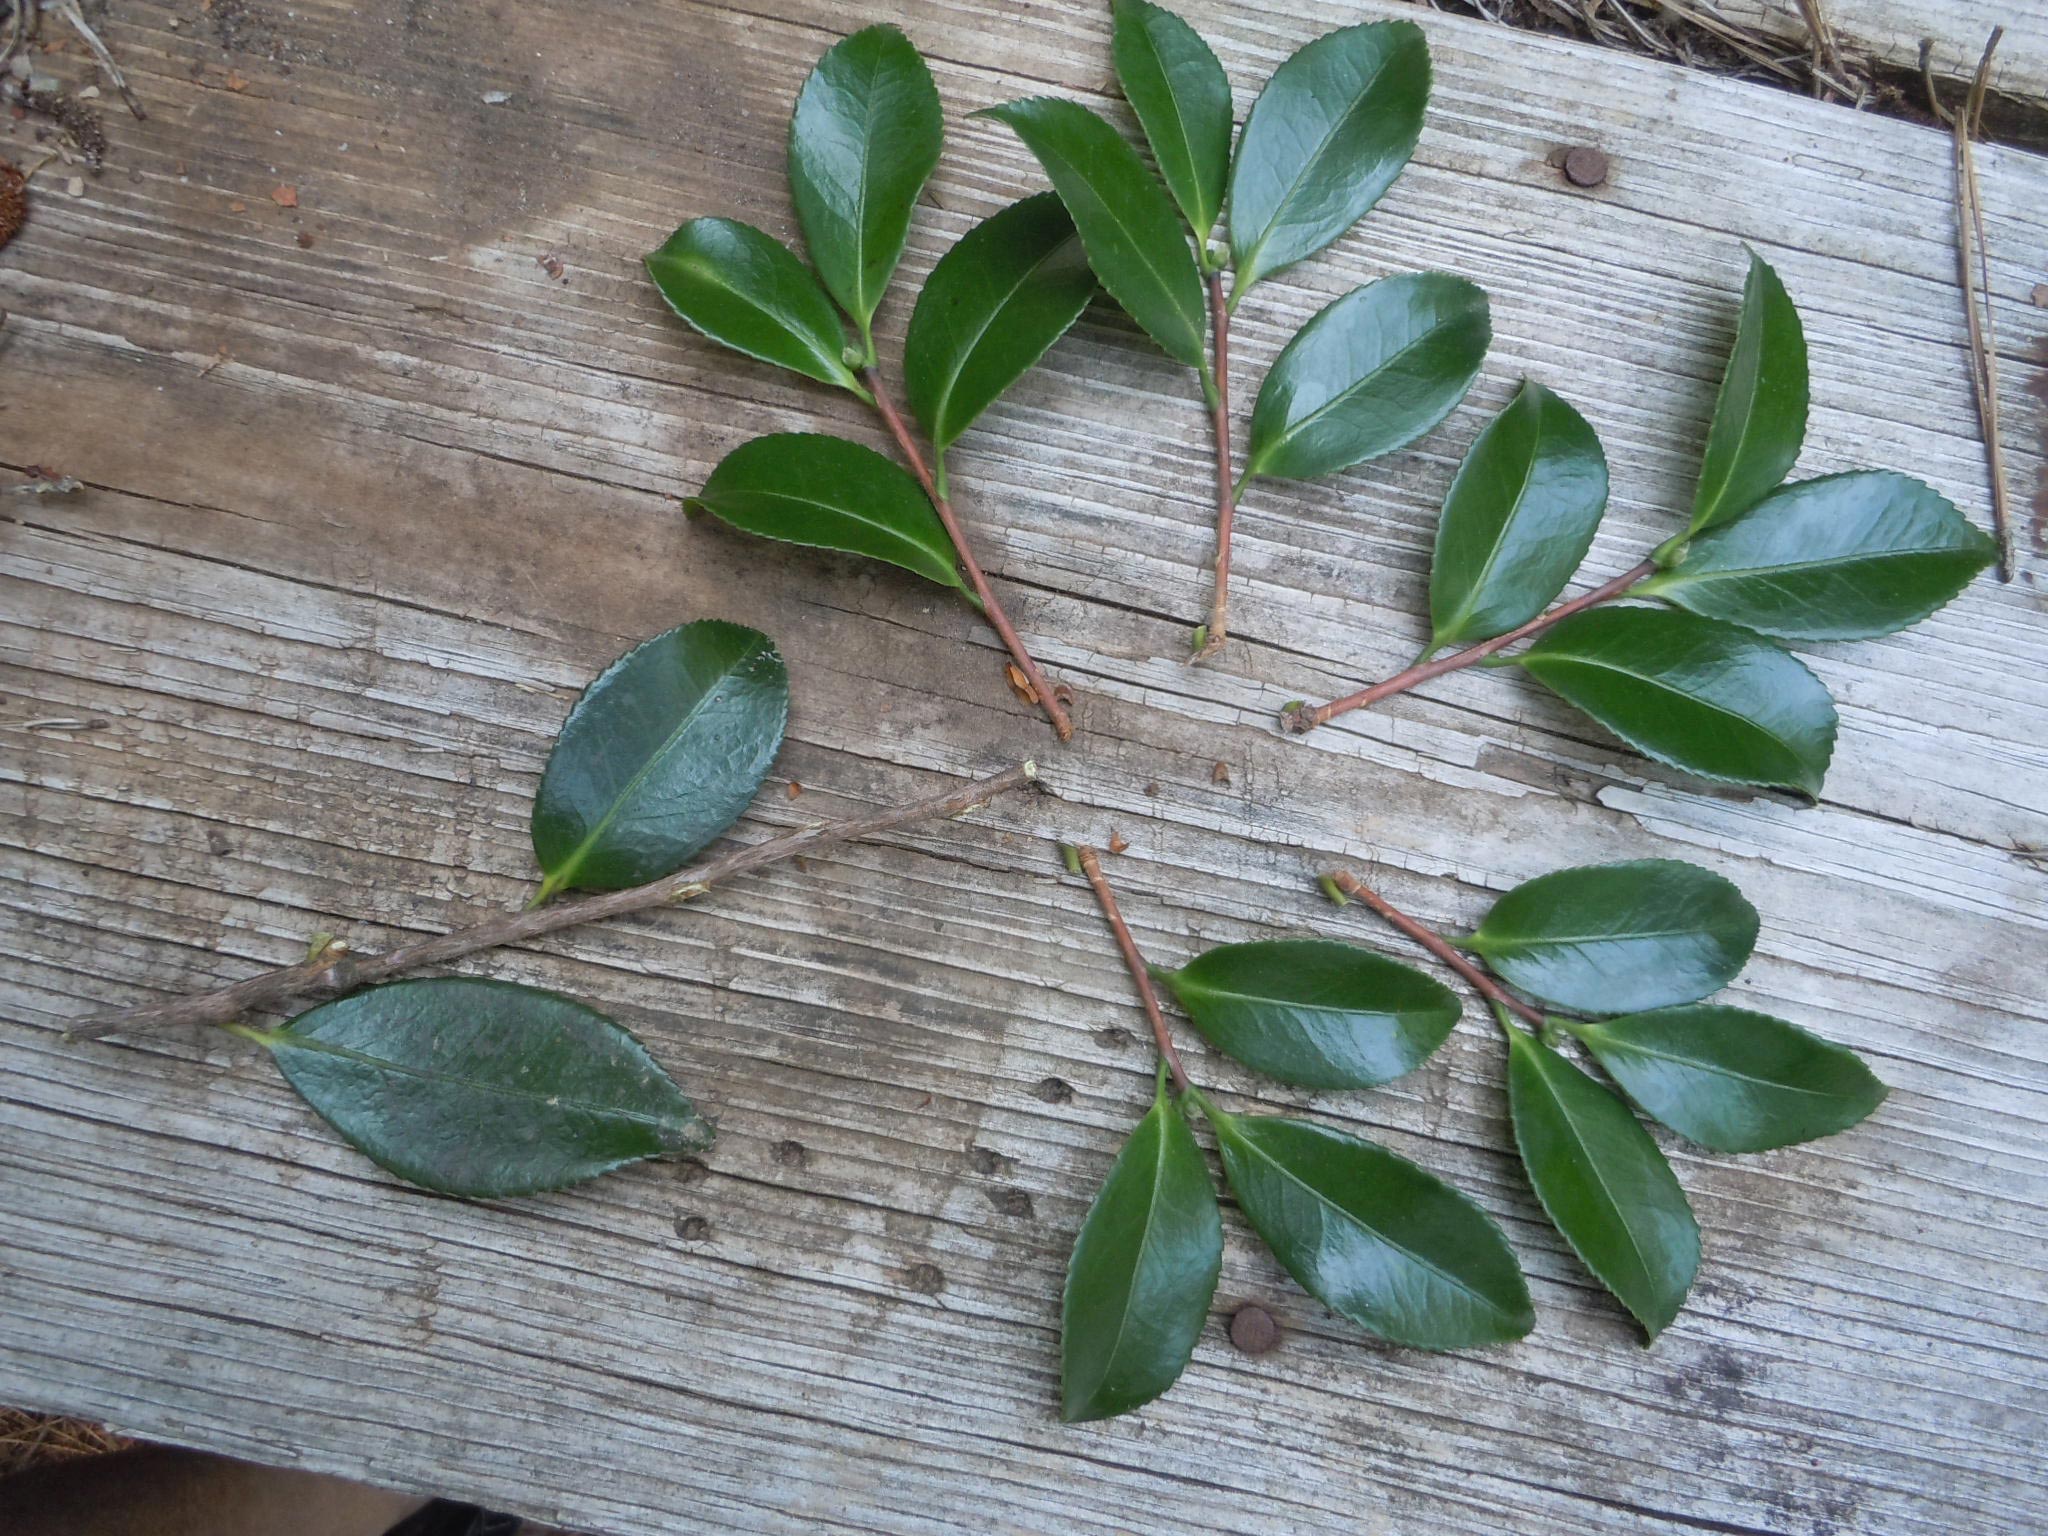 make several 4" cuttings from the limb